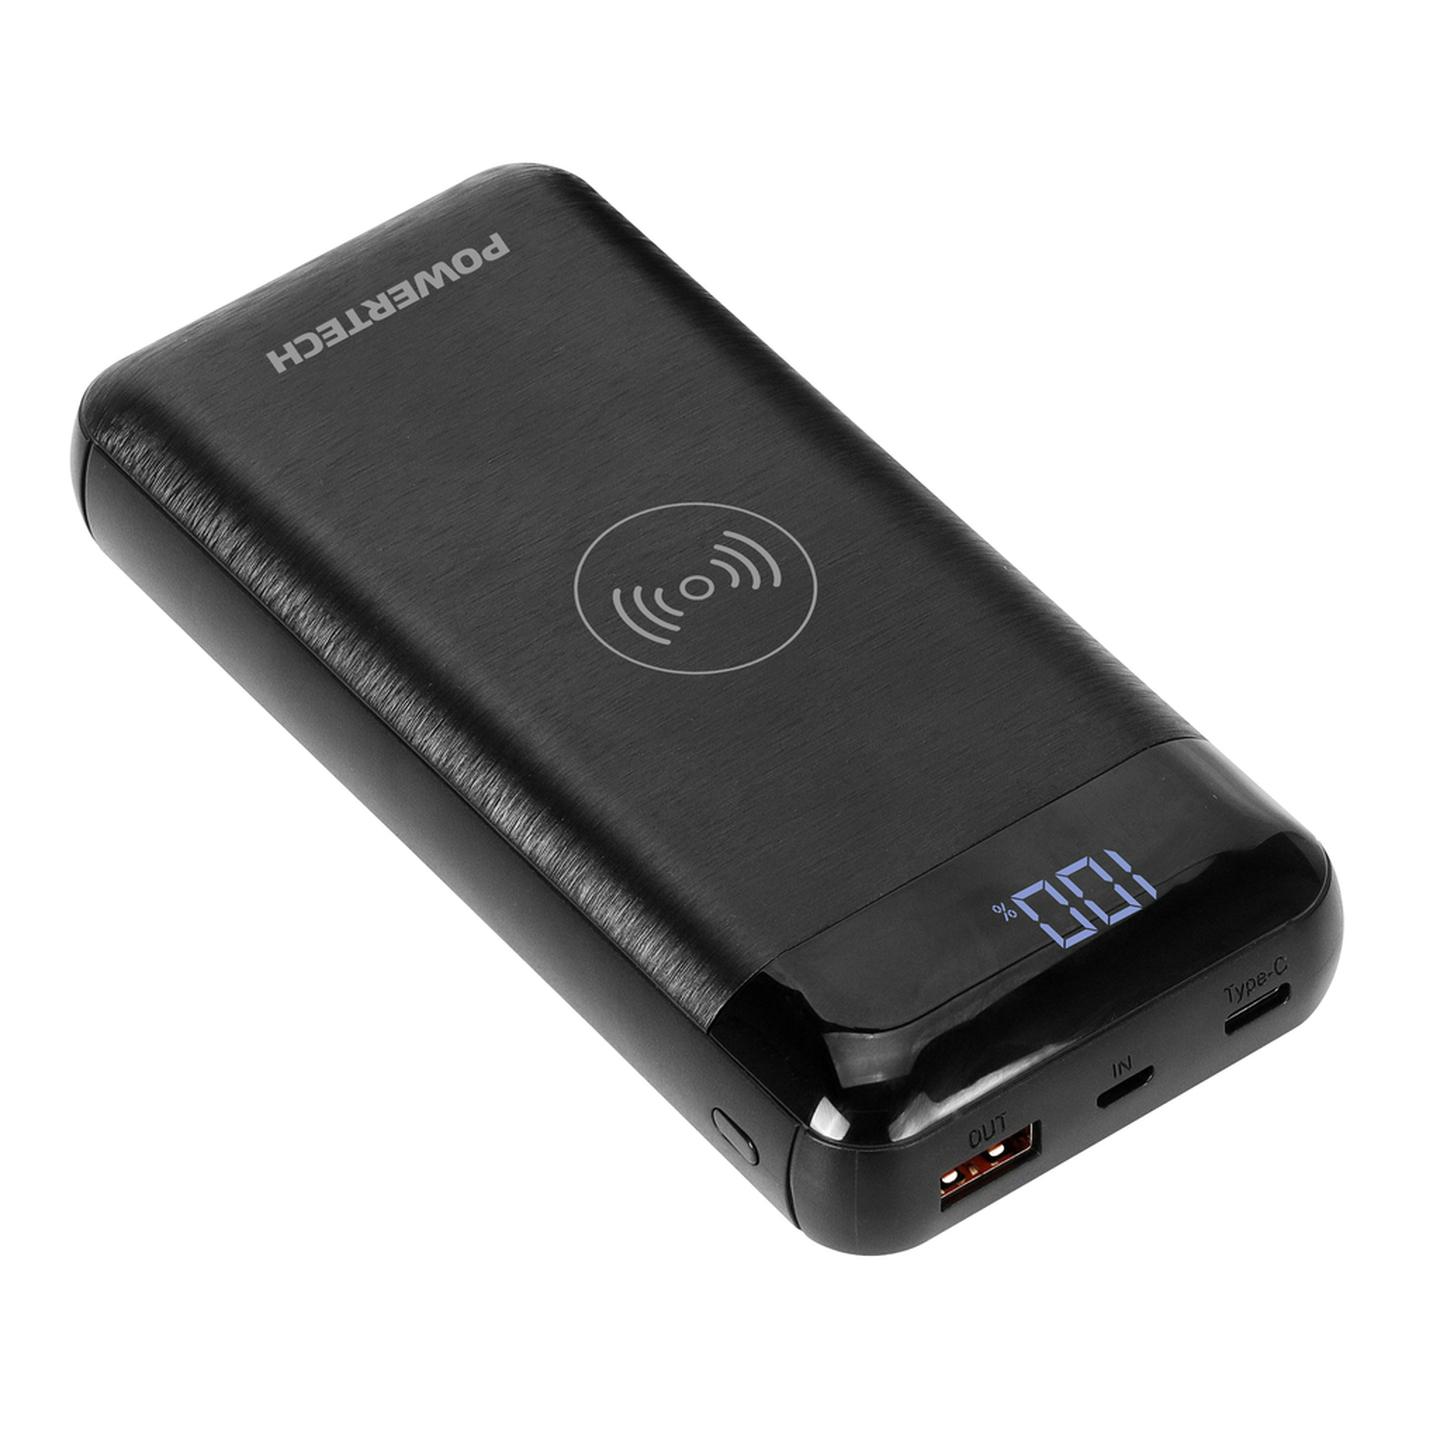 Powertech 20000mAh Power Bank with 2 x USB and Wireless Charger in Black